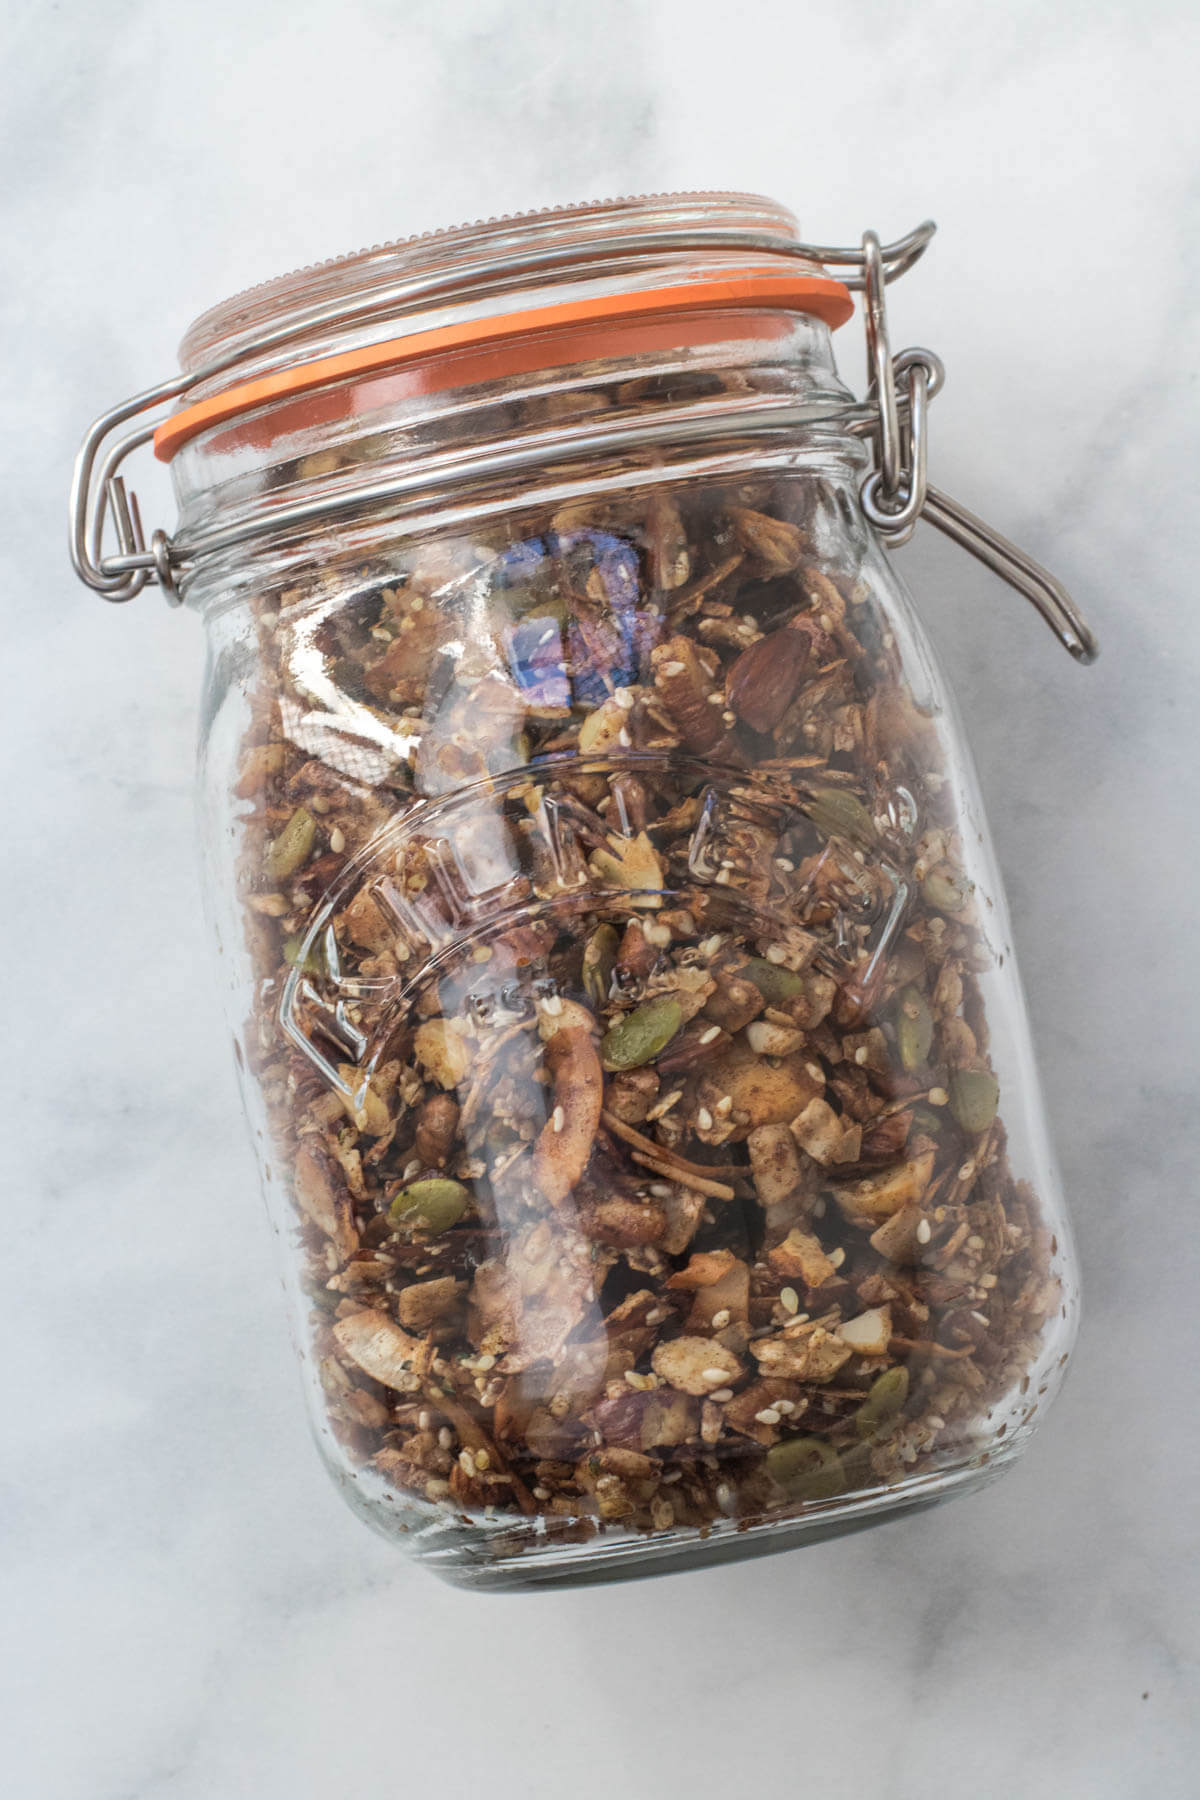 Finished and completely granola stored in a glass airtight jar.